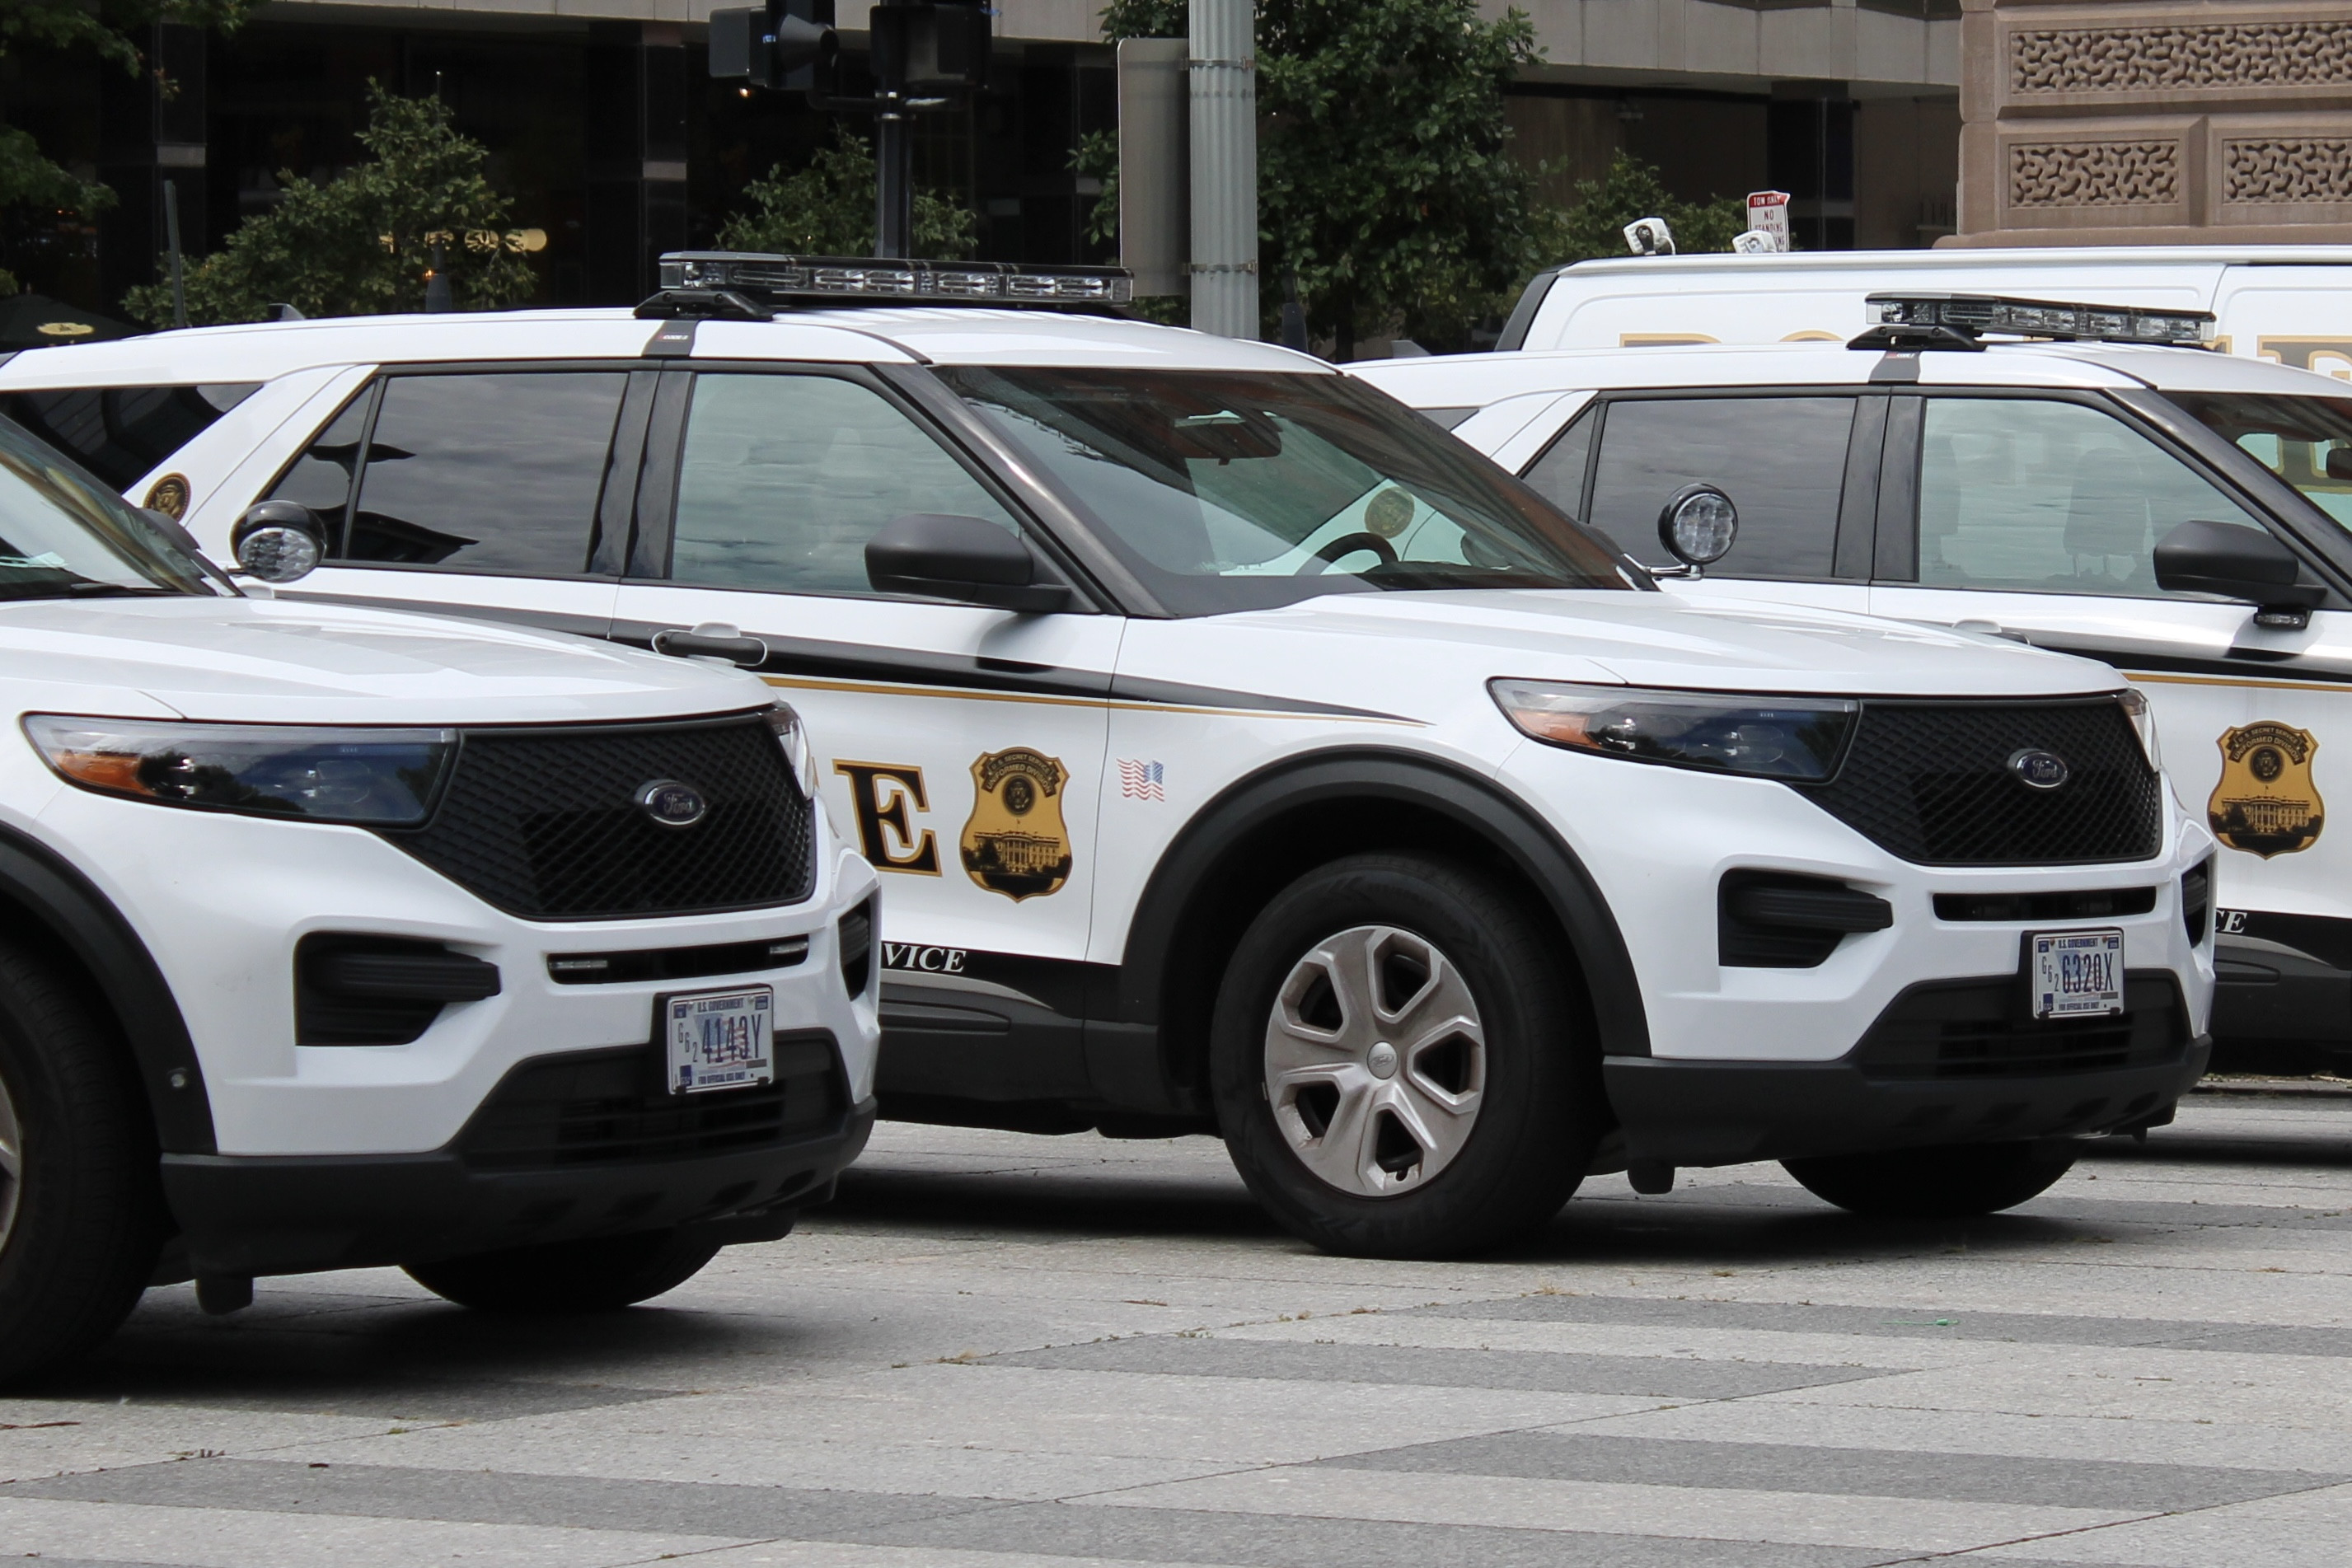 A photo  of United States Secret Service
            Cruiser 6320, a 2020-2022 Ford Police Interceptor Utility             taken by @riemergencyvehicles